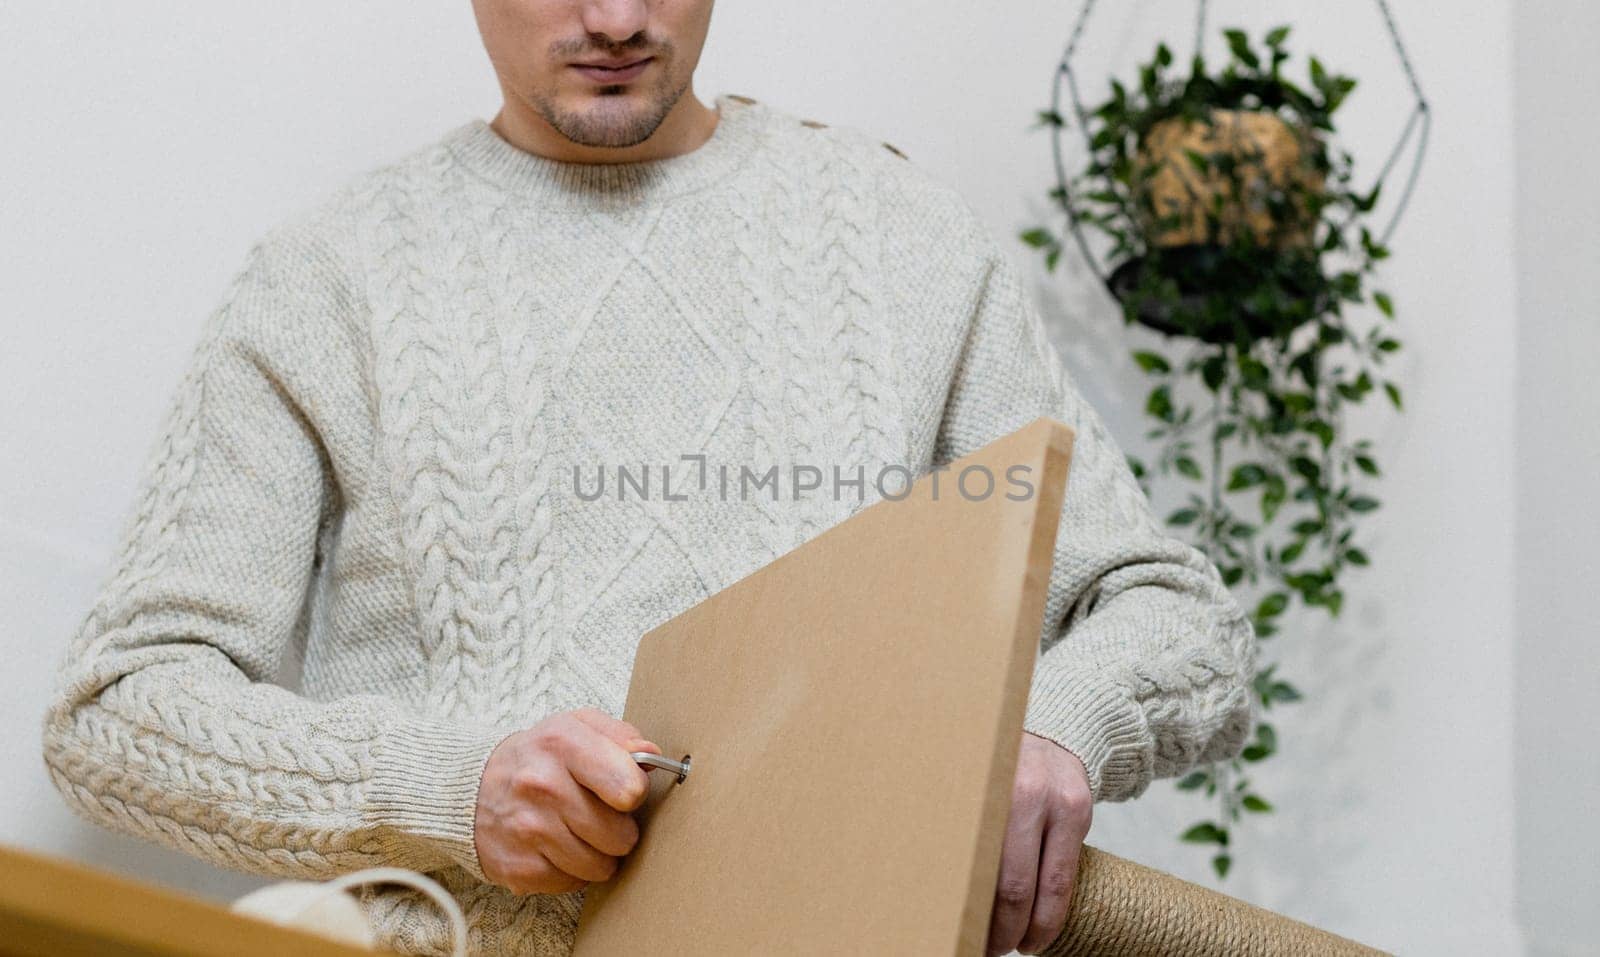 Young caucasian man in a knitted sweater and jeans manually drives a screw into a board while assembling a cat scratching post, standing at a table against a white wall with a hanging flower, close-up view from below. Concept assembly of a scratching post, cat furniture.